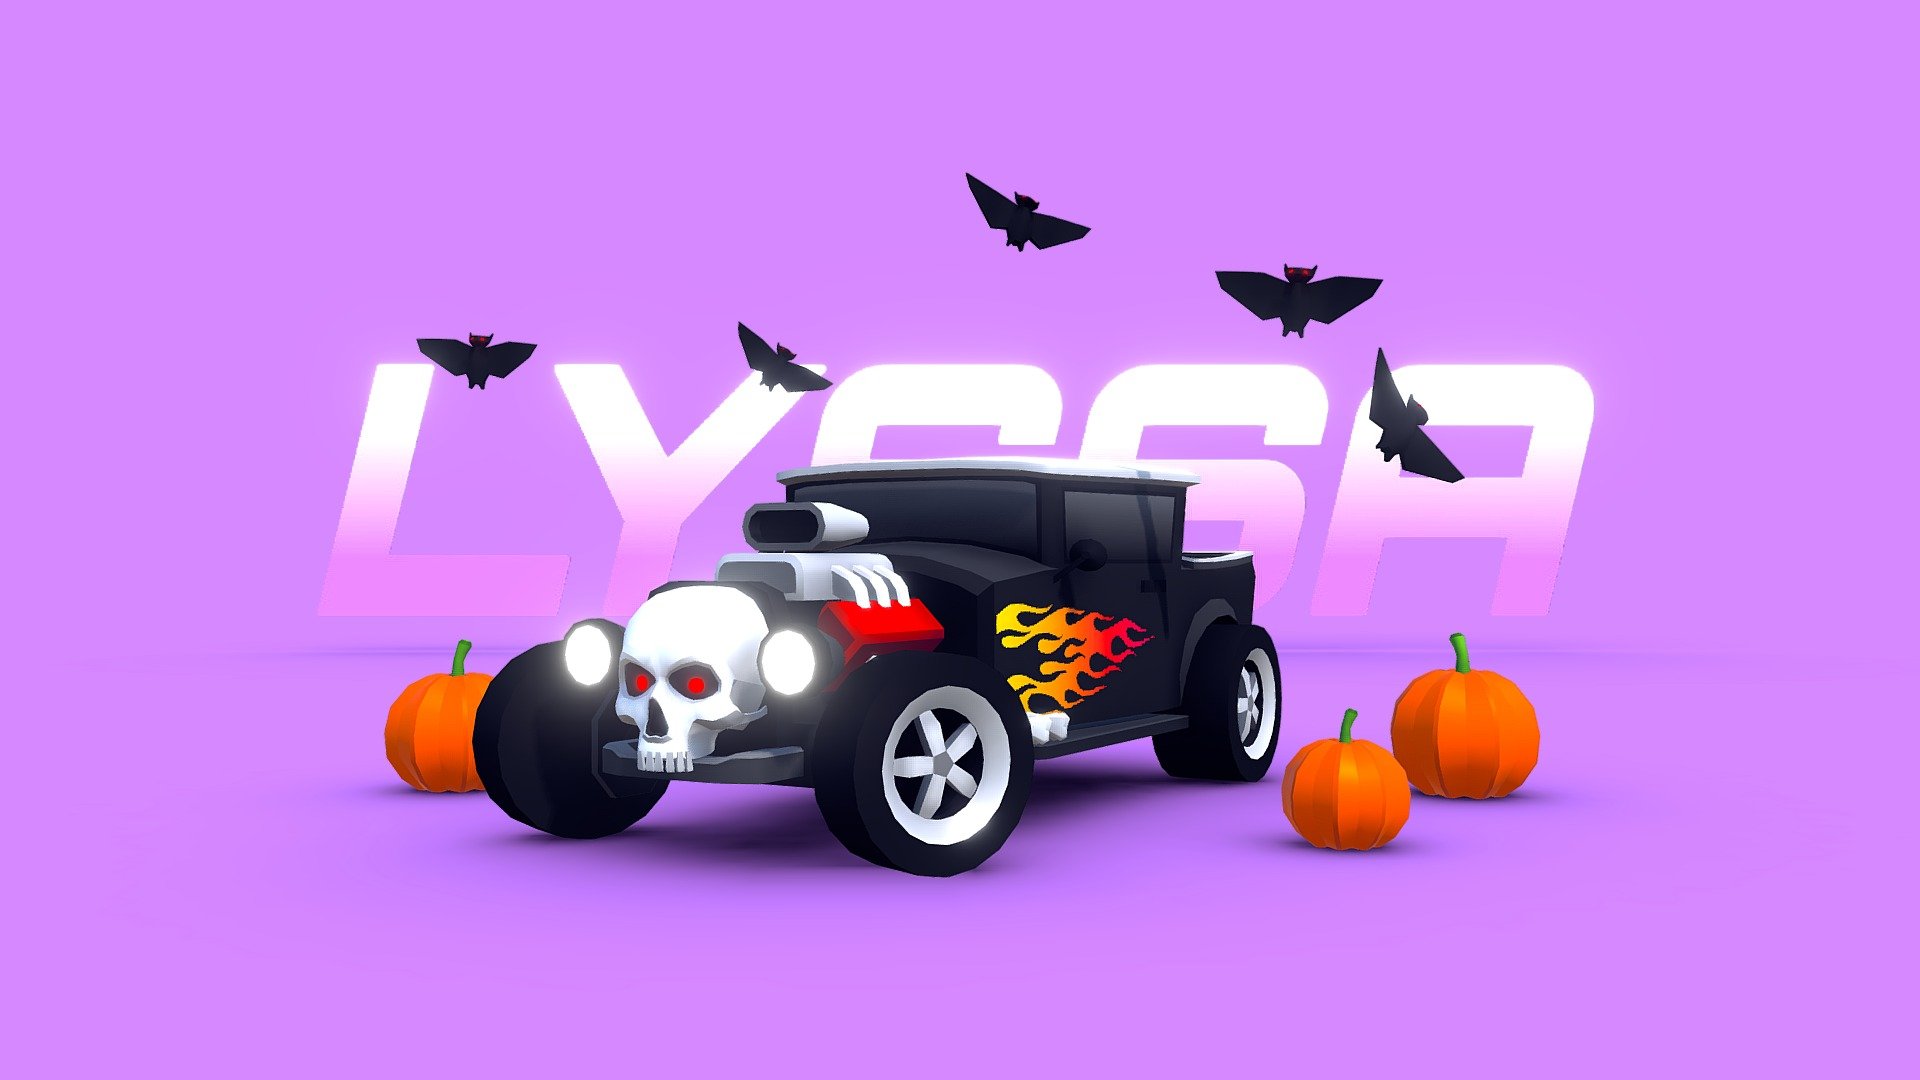 This car will be included in the October 2022 update of ARCADE: Ultimate Vehicles Pack 

I was thinking of creating a halloween themed car. So, I made this hot rod with a giant skull in the front and bones as exhausts!. I hope you like it.

Best regards,
Mena 3d model